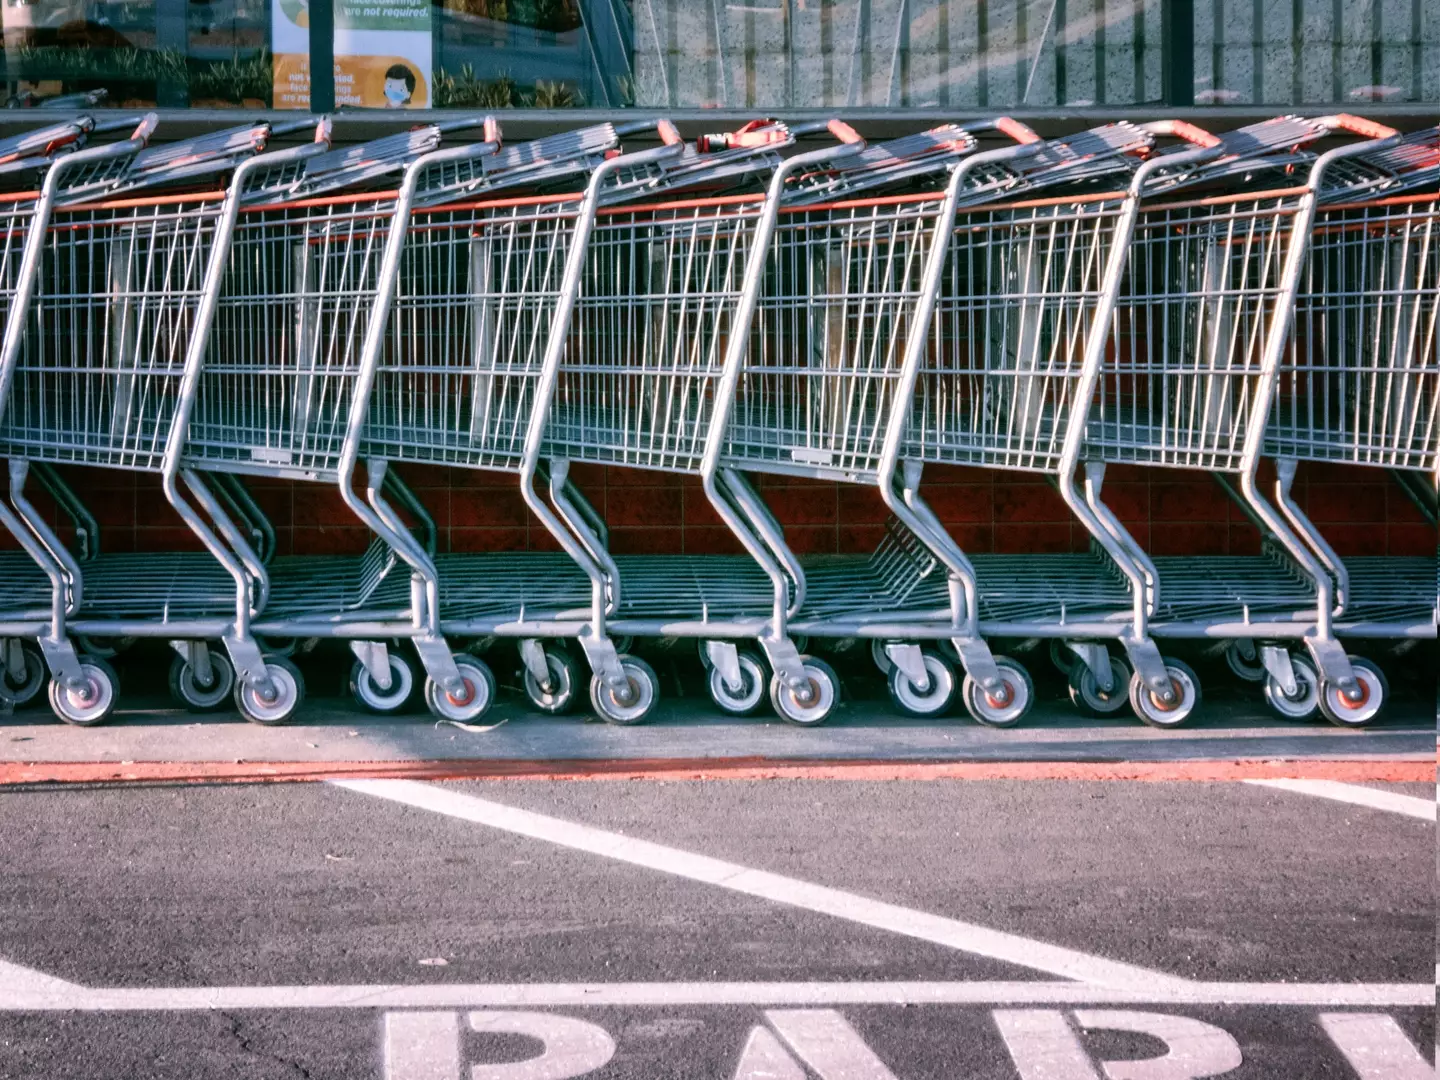 There's an easier way to unlock the supermarket carts.